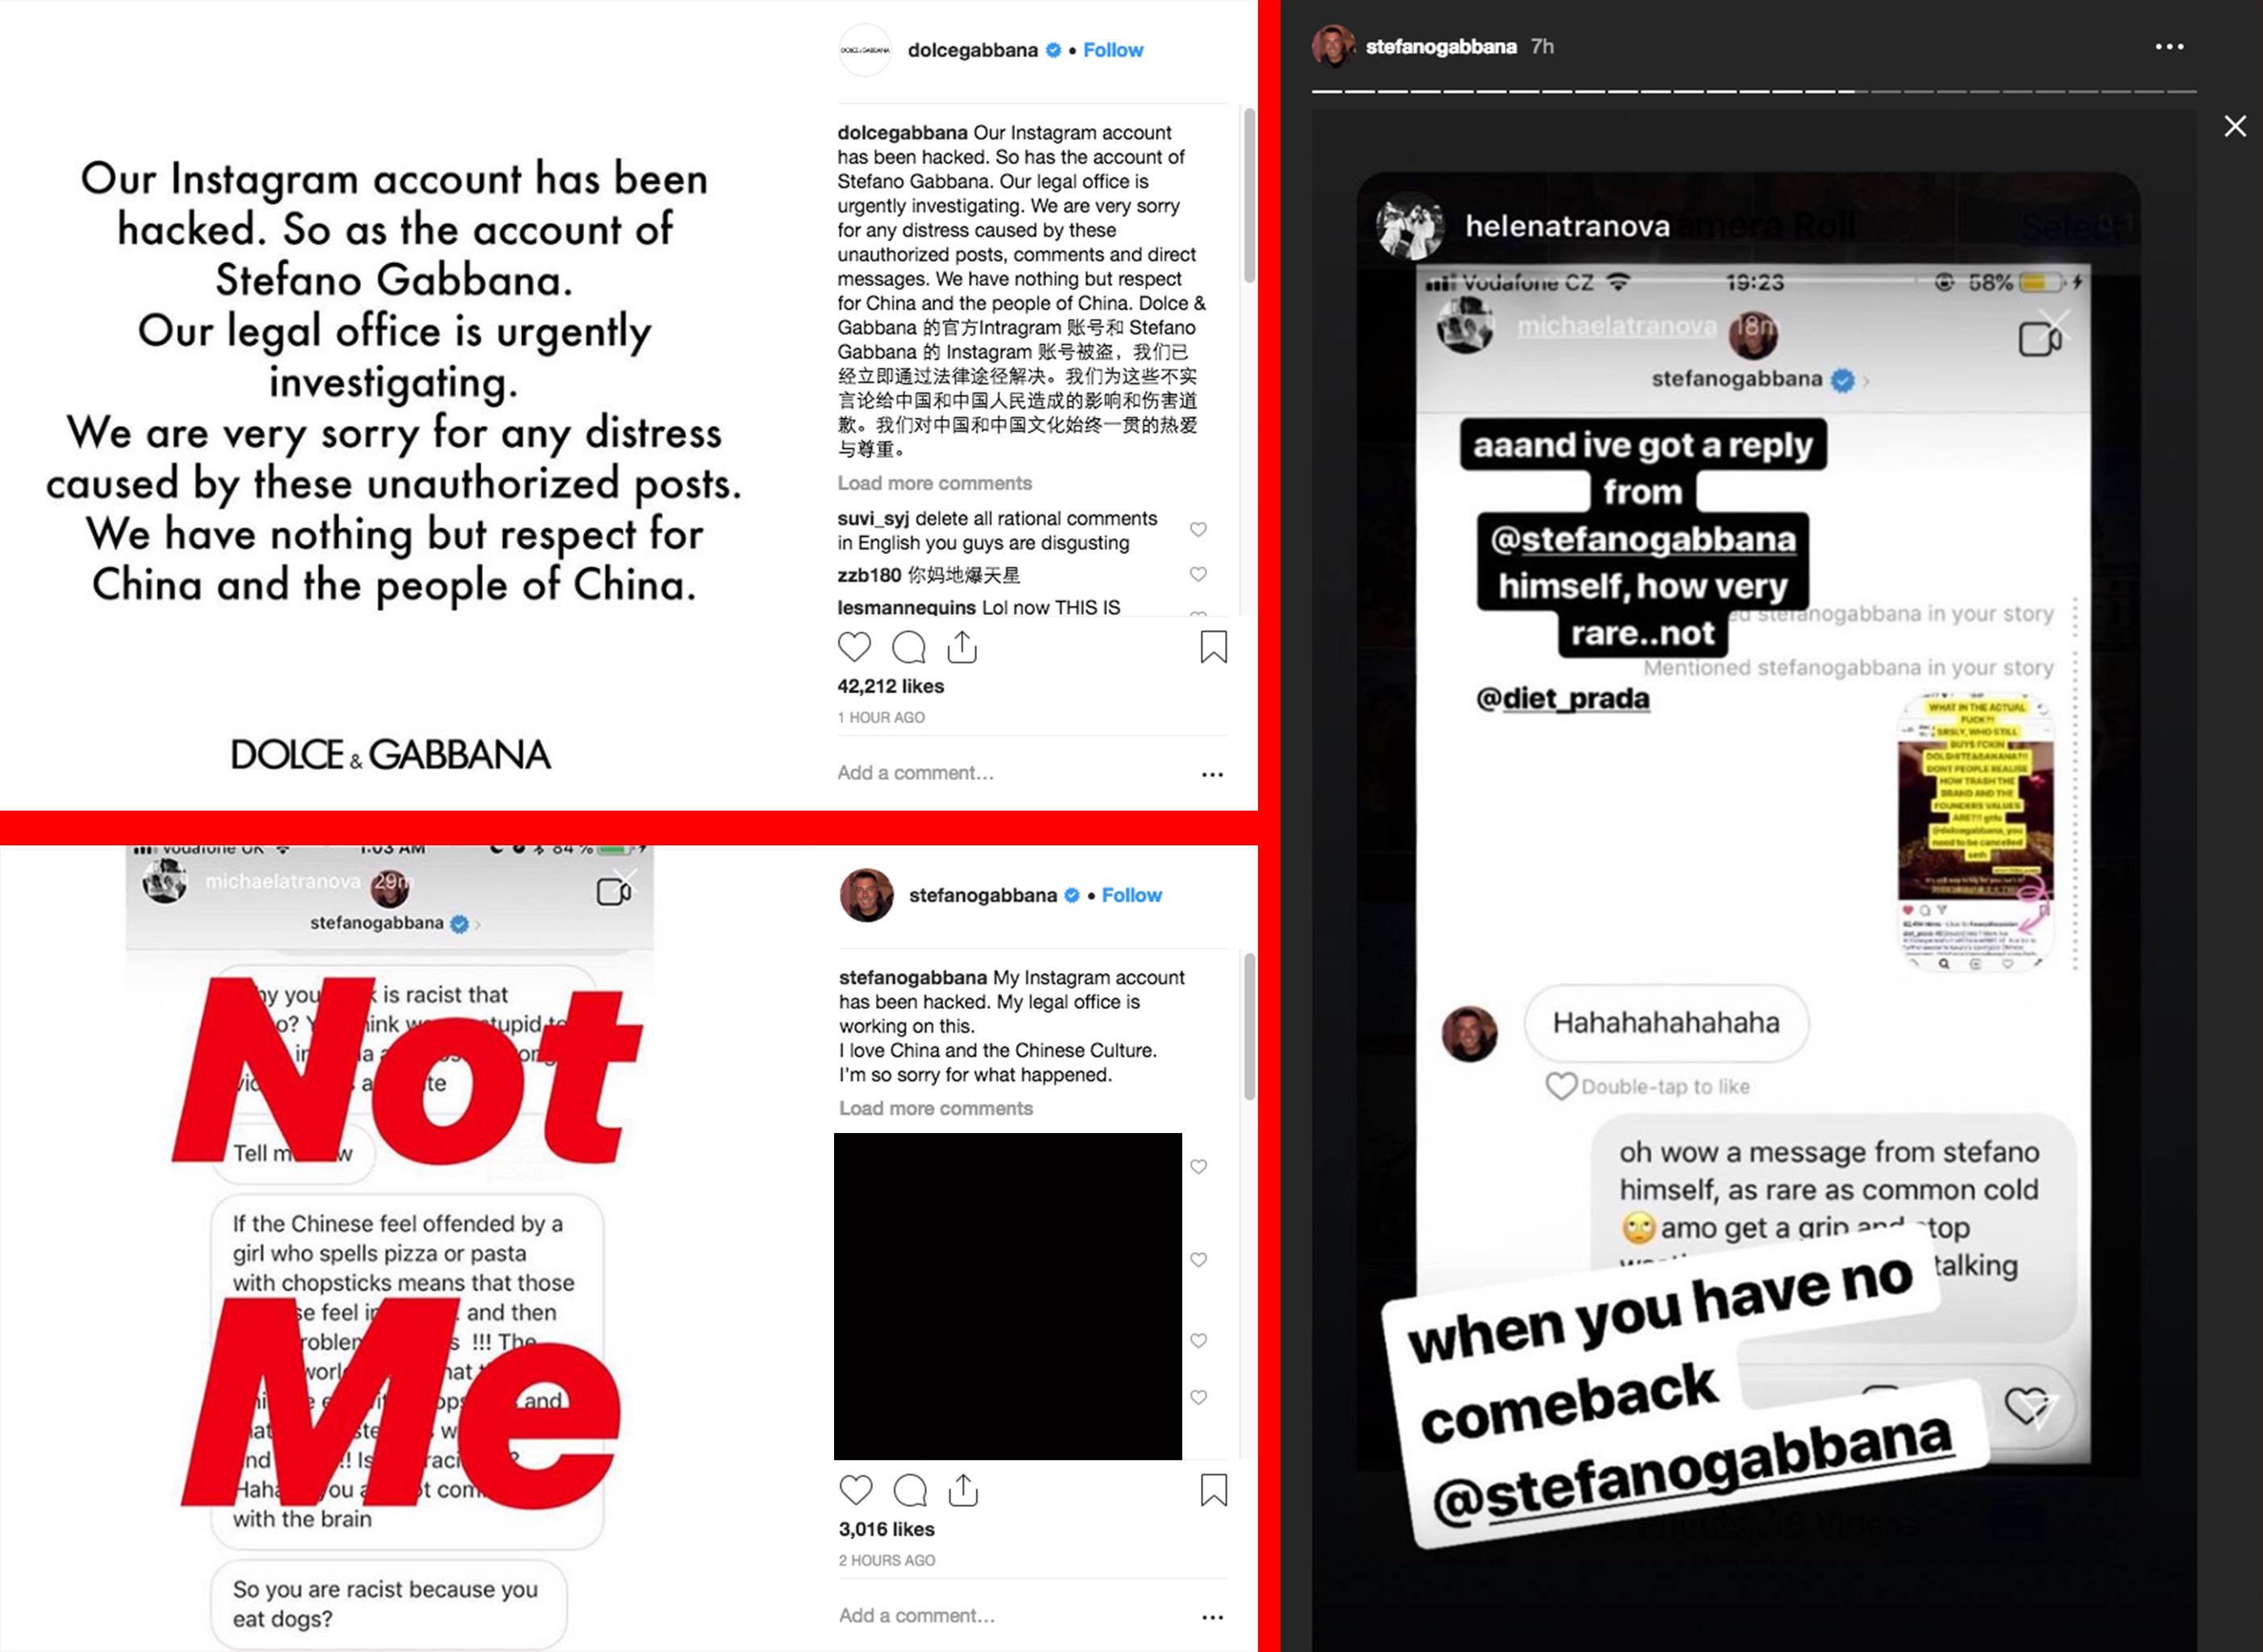 Statements from Dolce & Gabbana and Stefano Gabbana after the conversation surfaced; a screenshot of Stefano's IG story after he released his statement